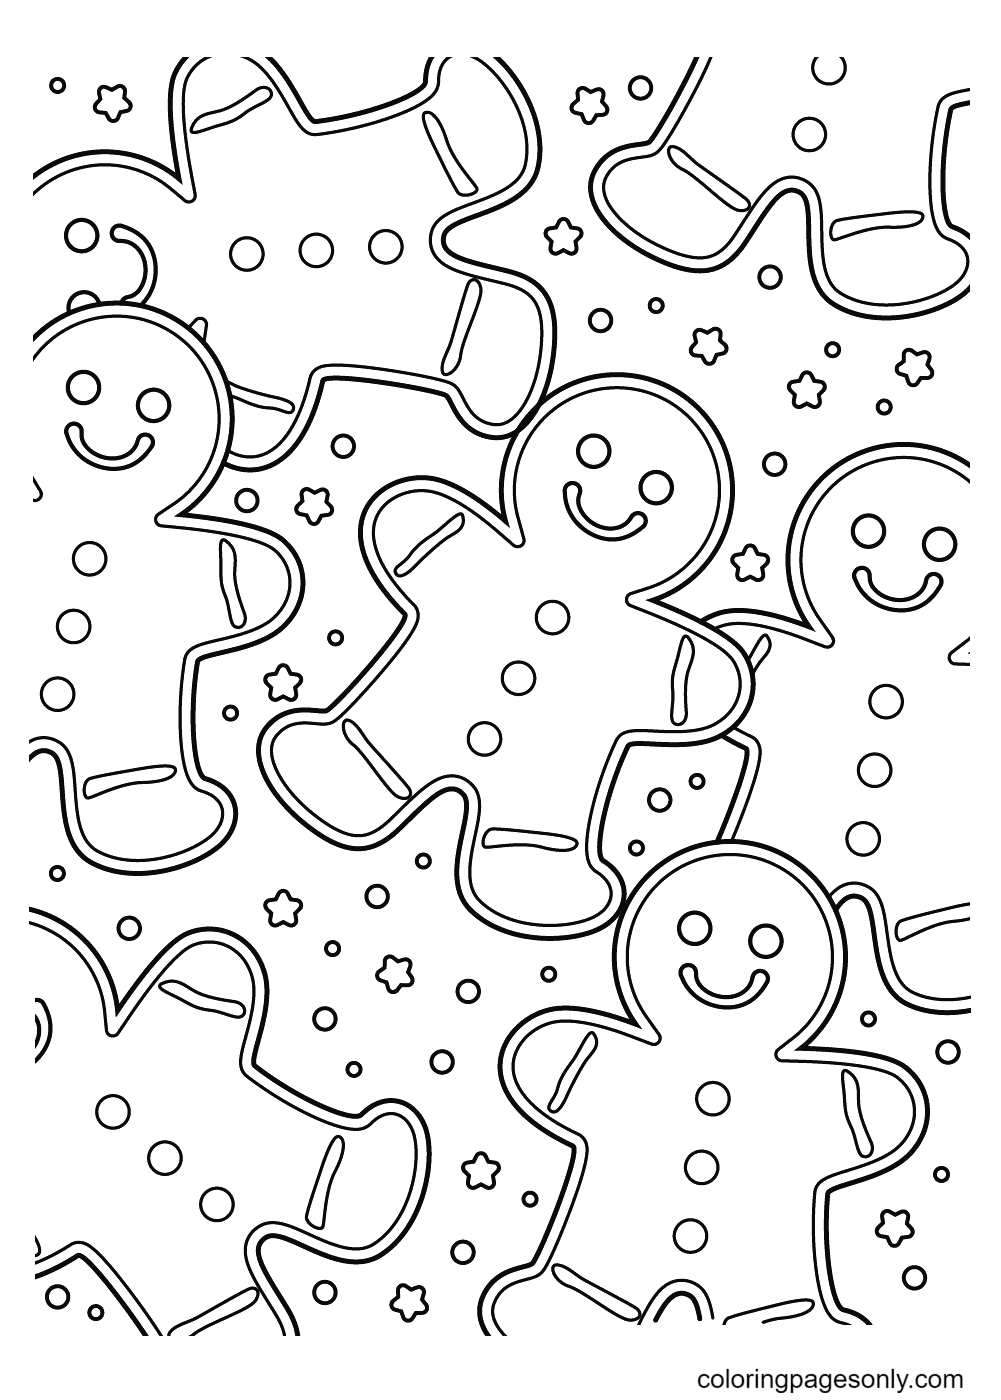 Gingerbread Man out of the Oven Coloring Page